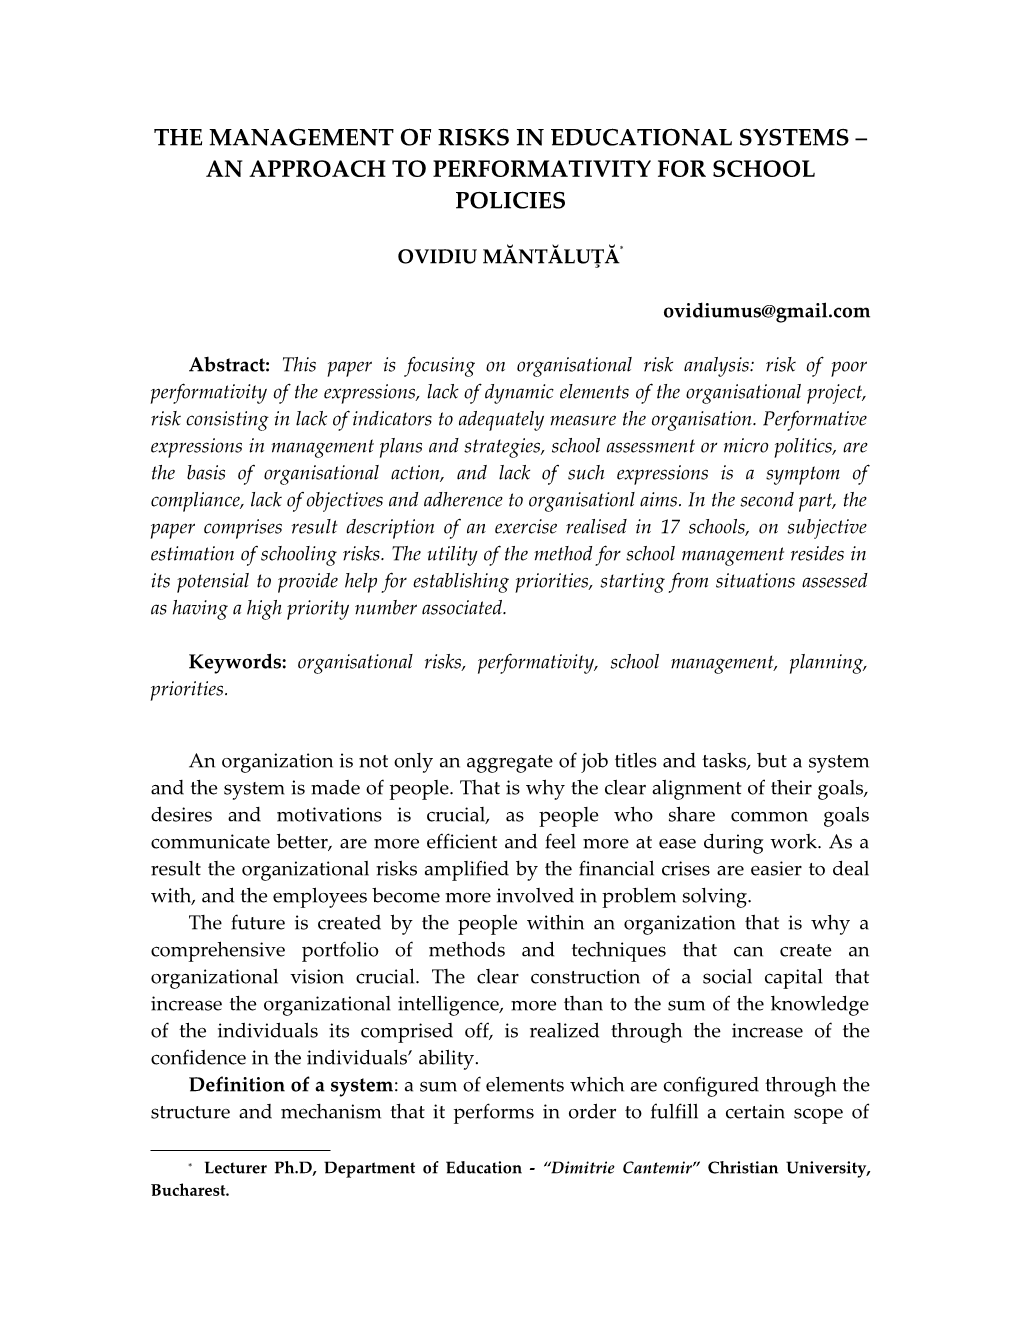 The Management of Risks in Educational Systems an Approach to Performativity for School Policies